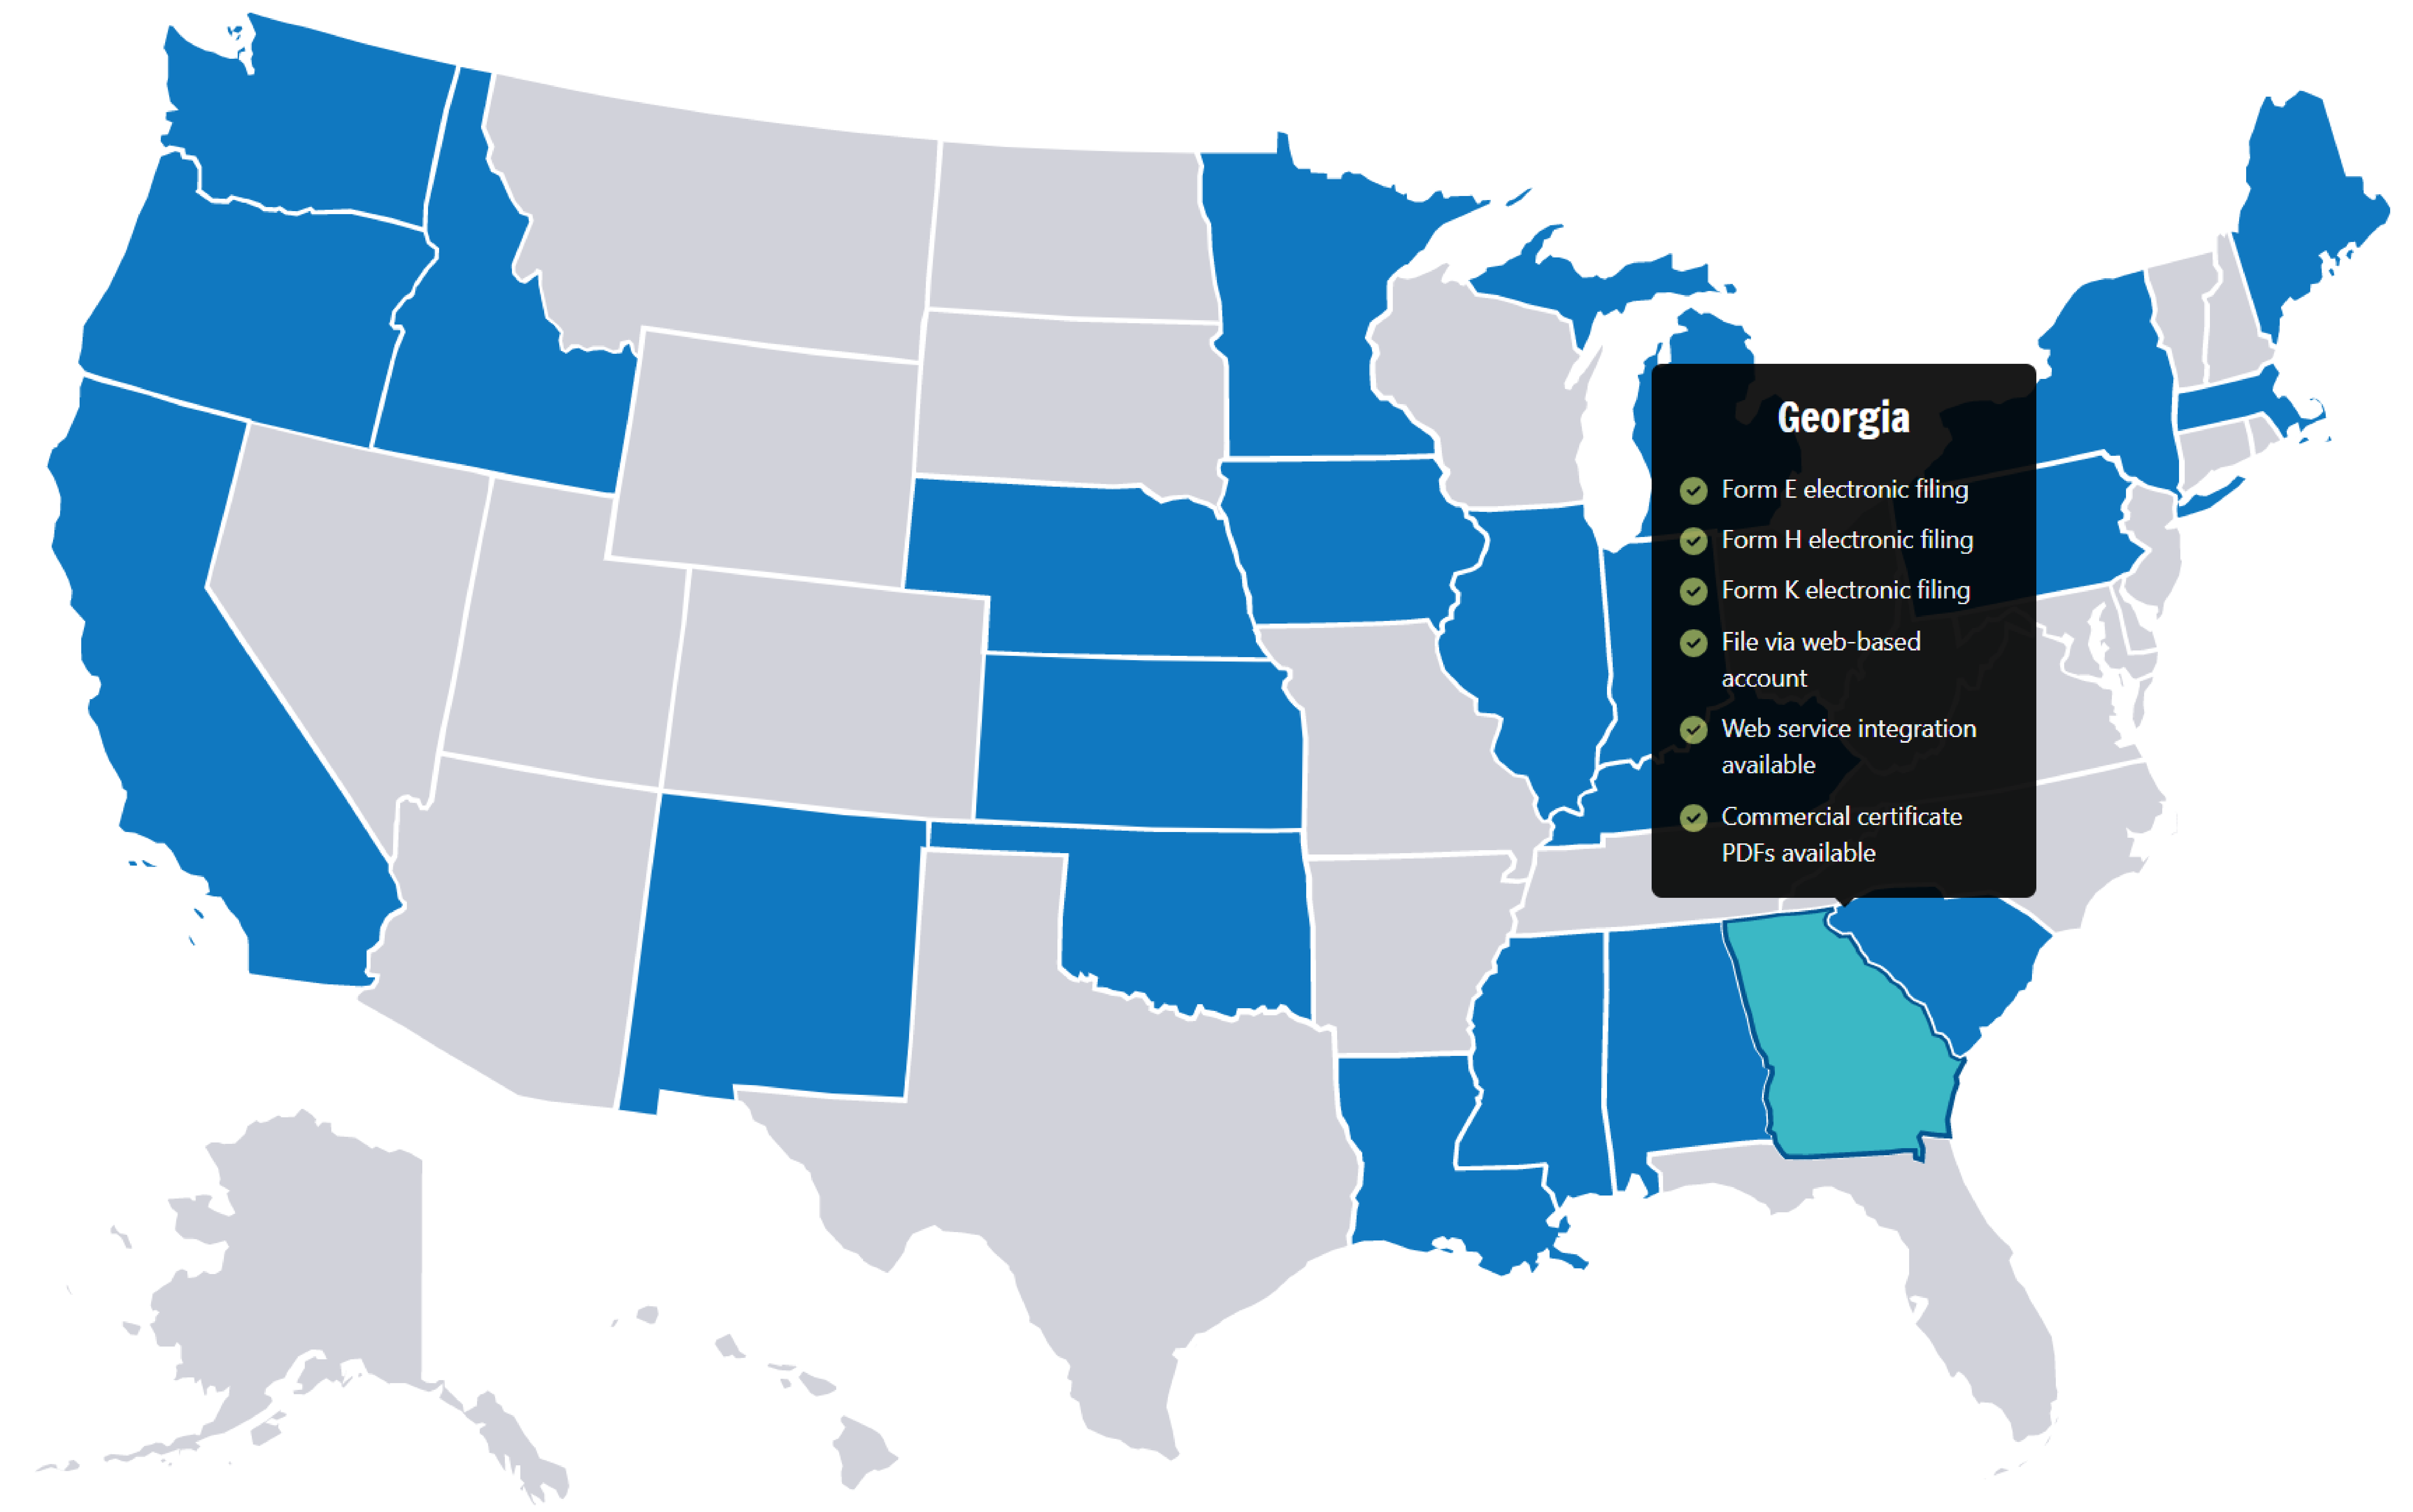 The new Products page provides an overview of products and services and features an interactive map that allows users to review available offerings by state.